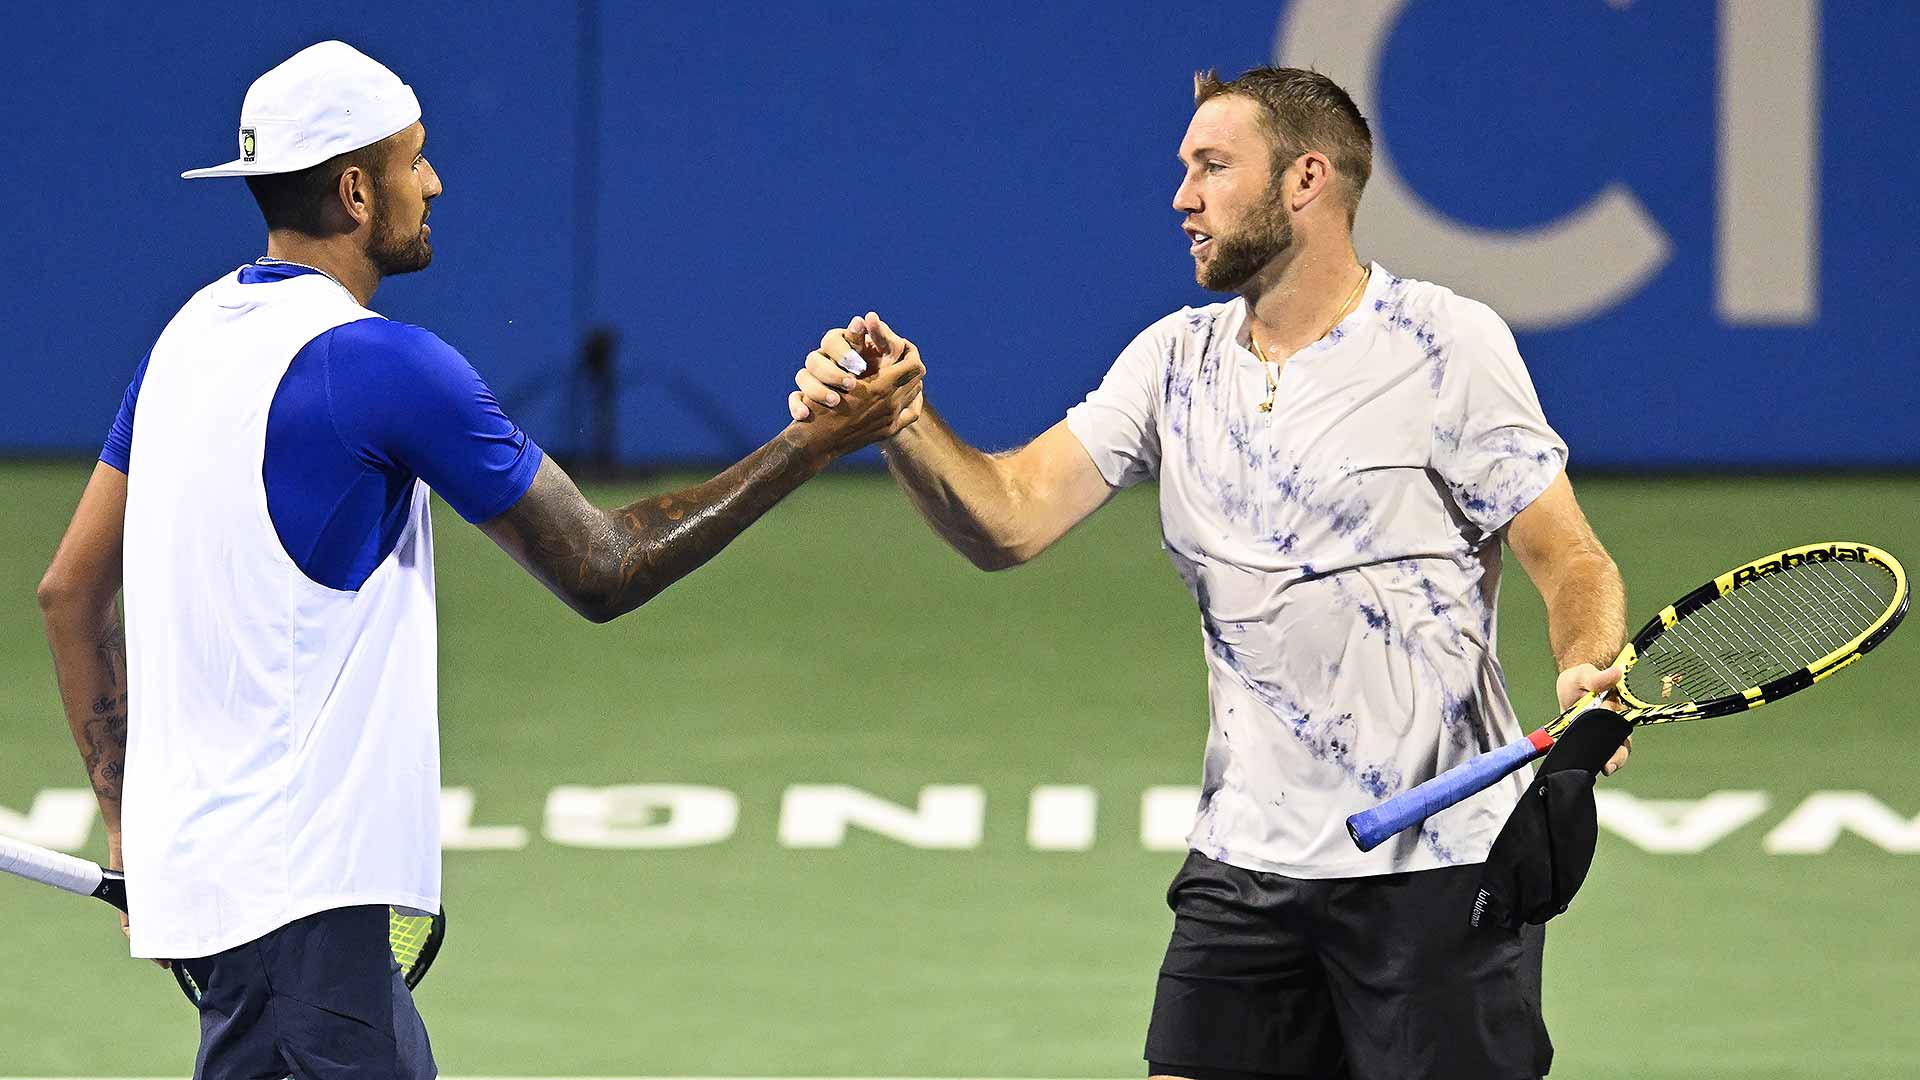 Nick Kyrgios Joins Forces With Jack Sock To Continue Winning Run In Washington ATP Tour Tennis